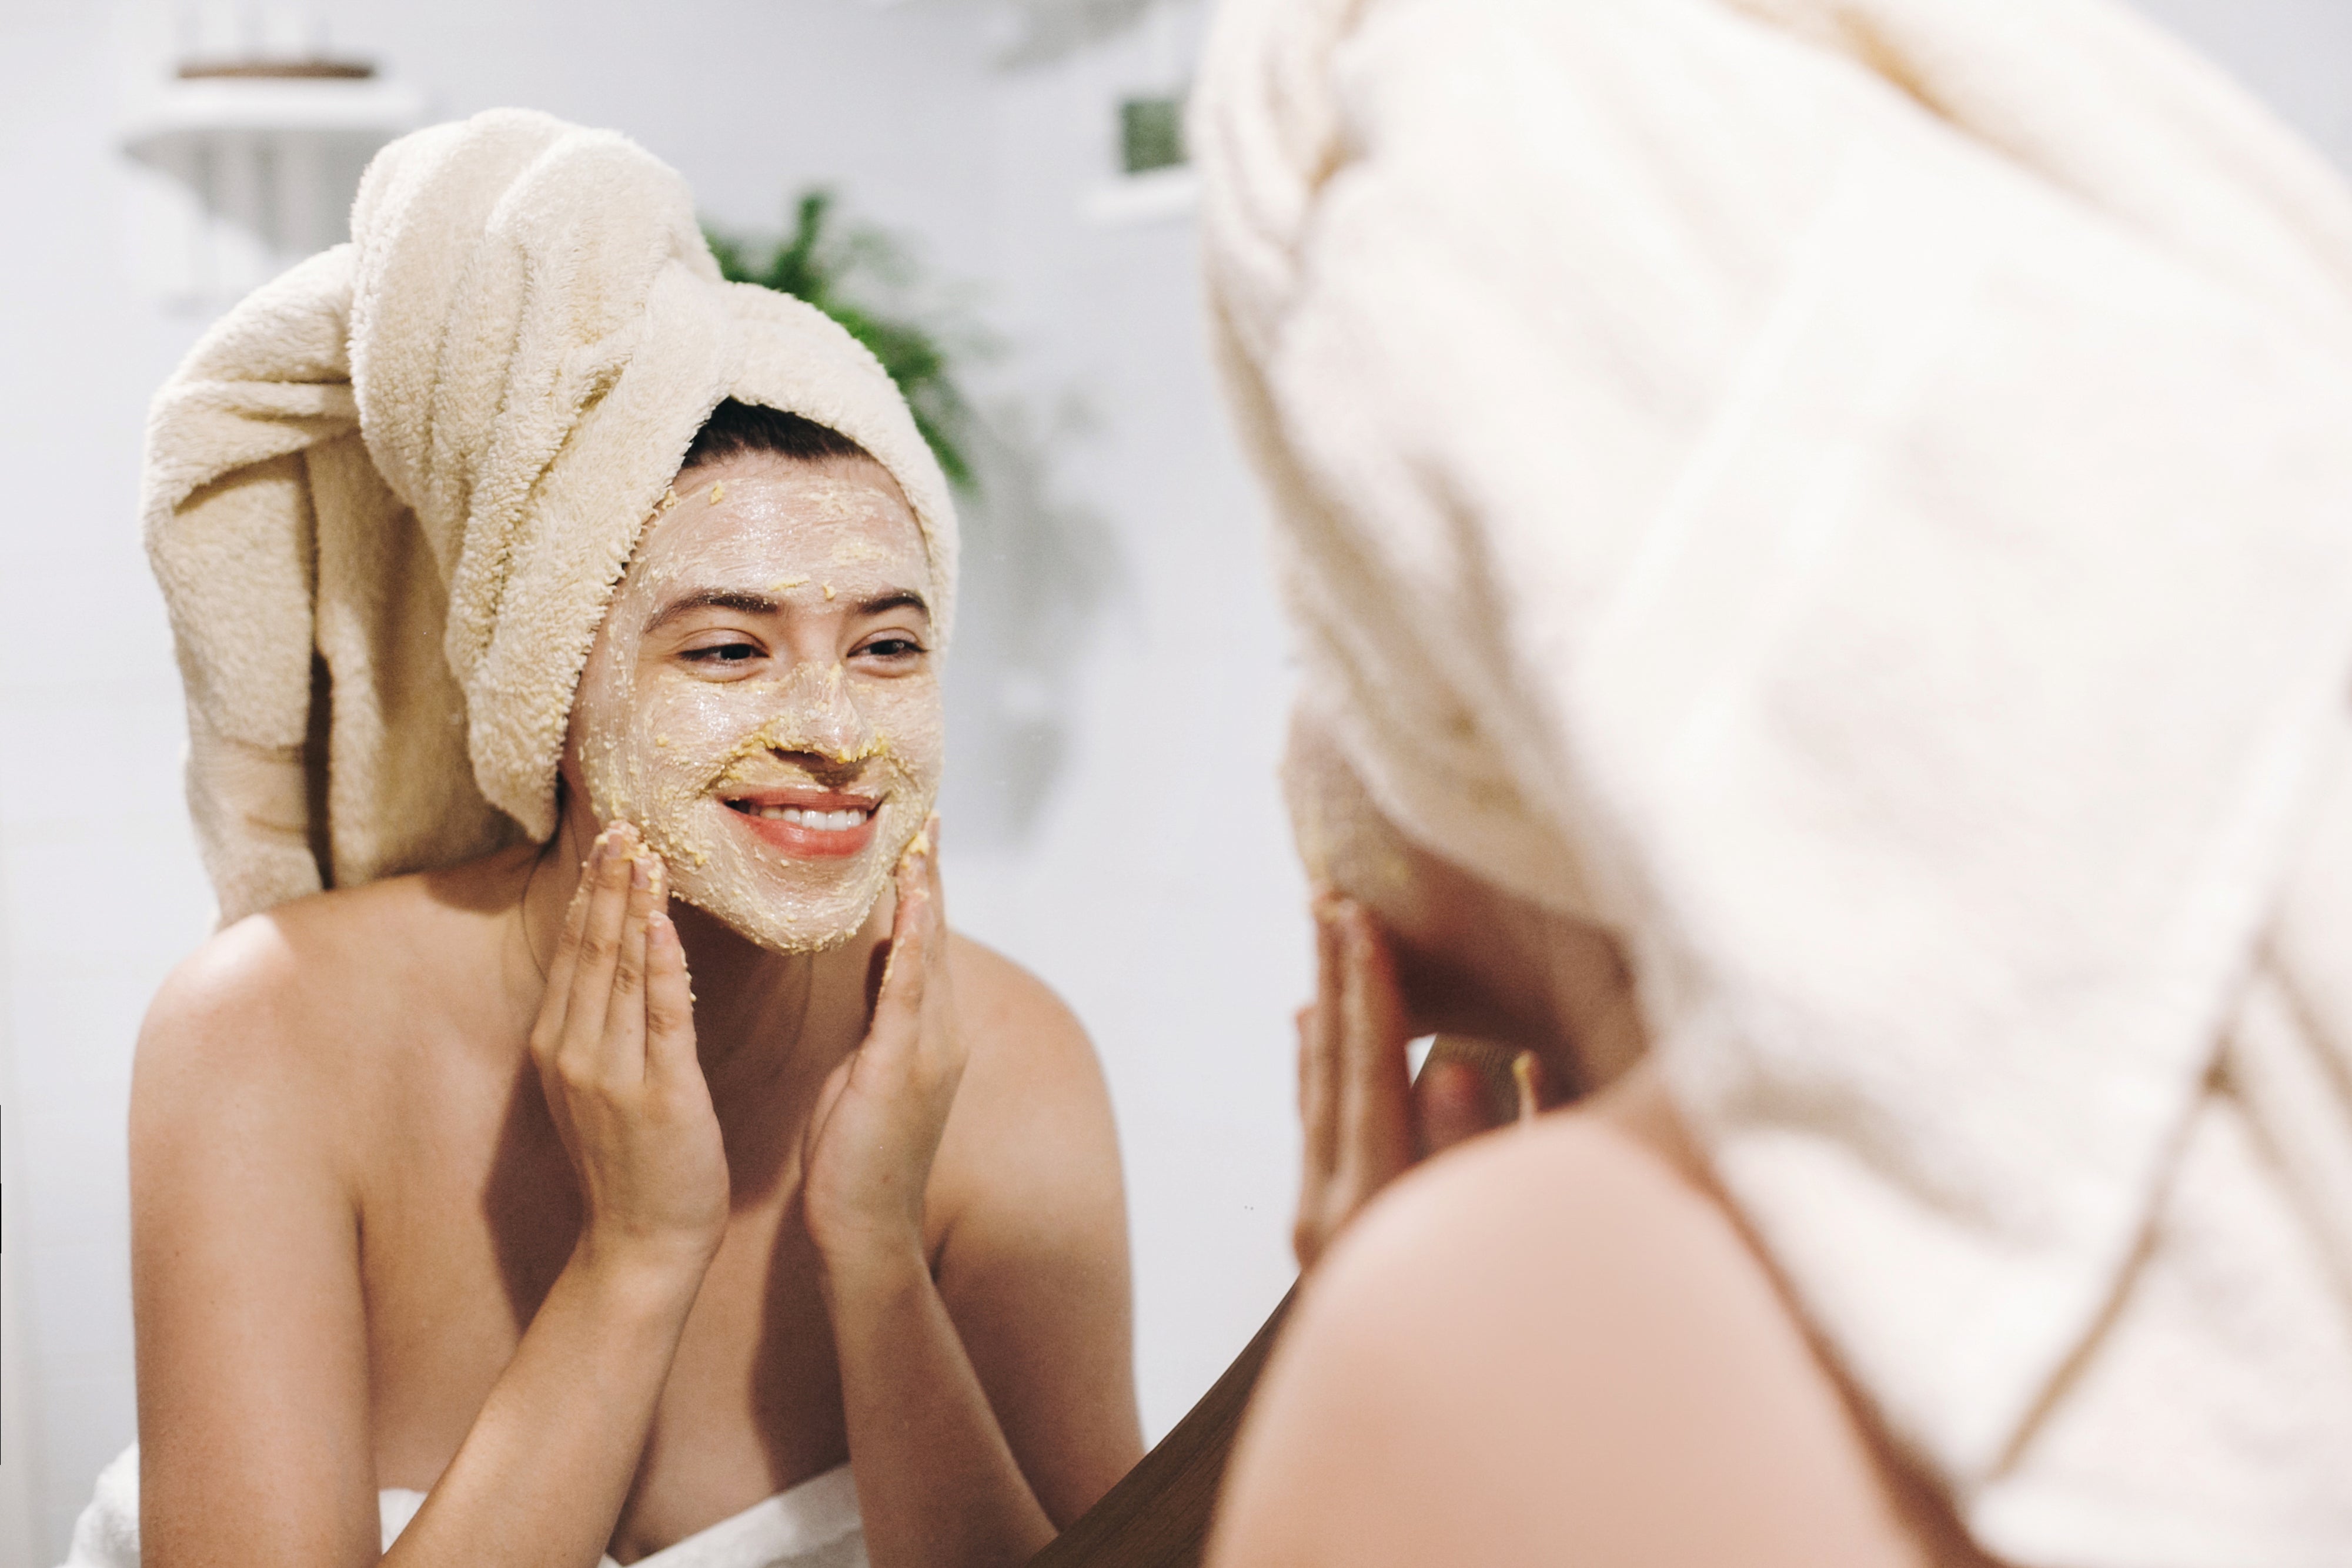 Dry Skin? A Hydrating Face Mask Is Just What the Derm Ordered